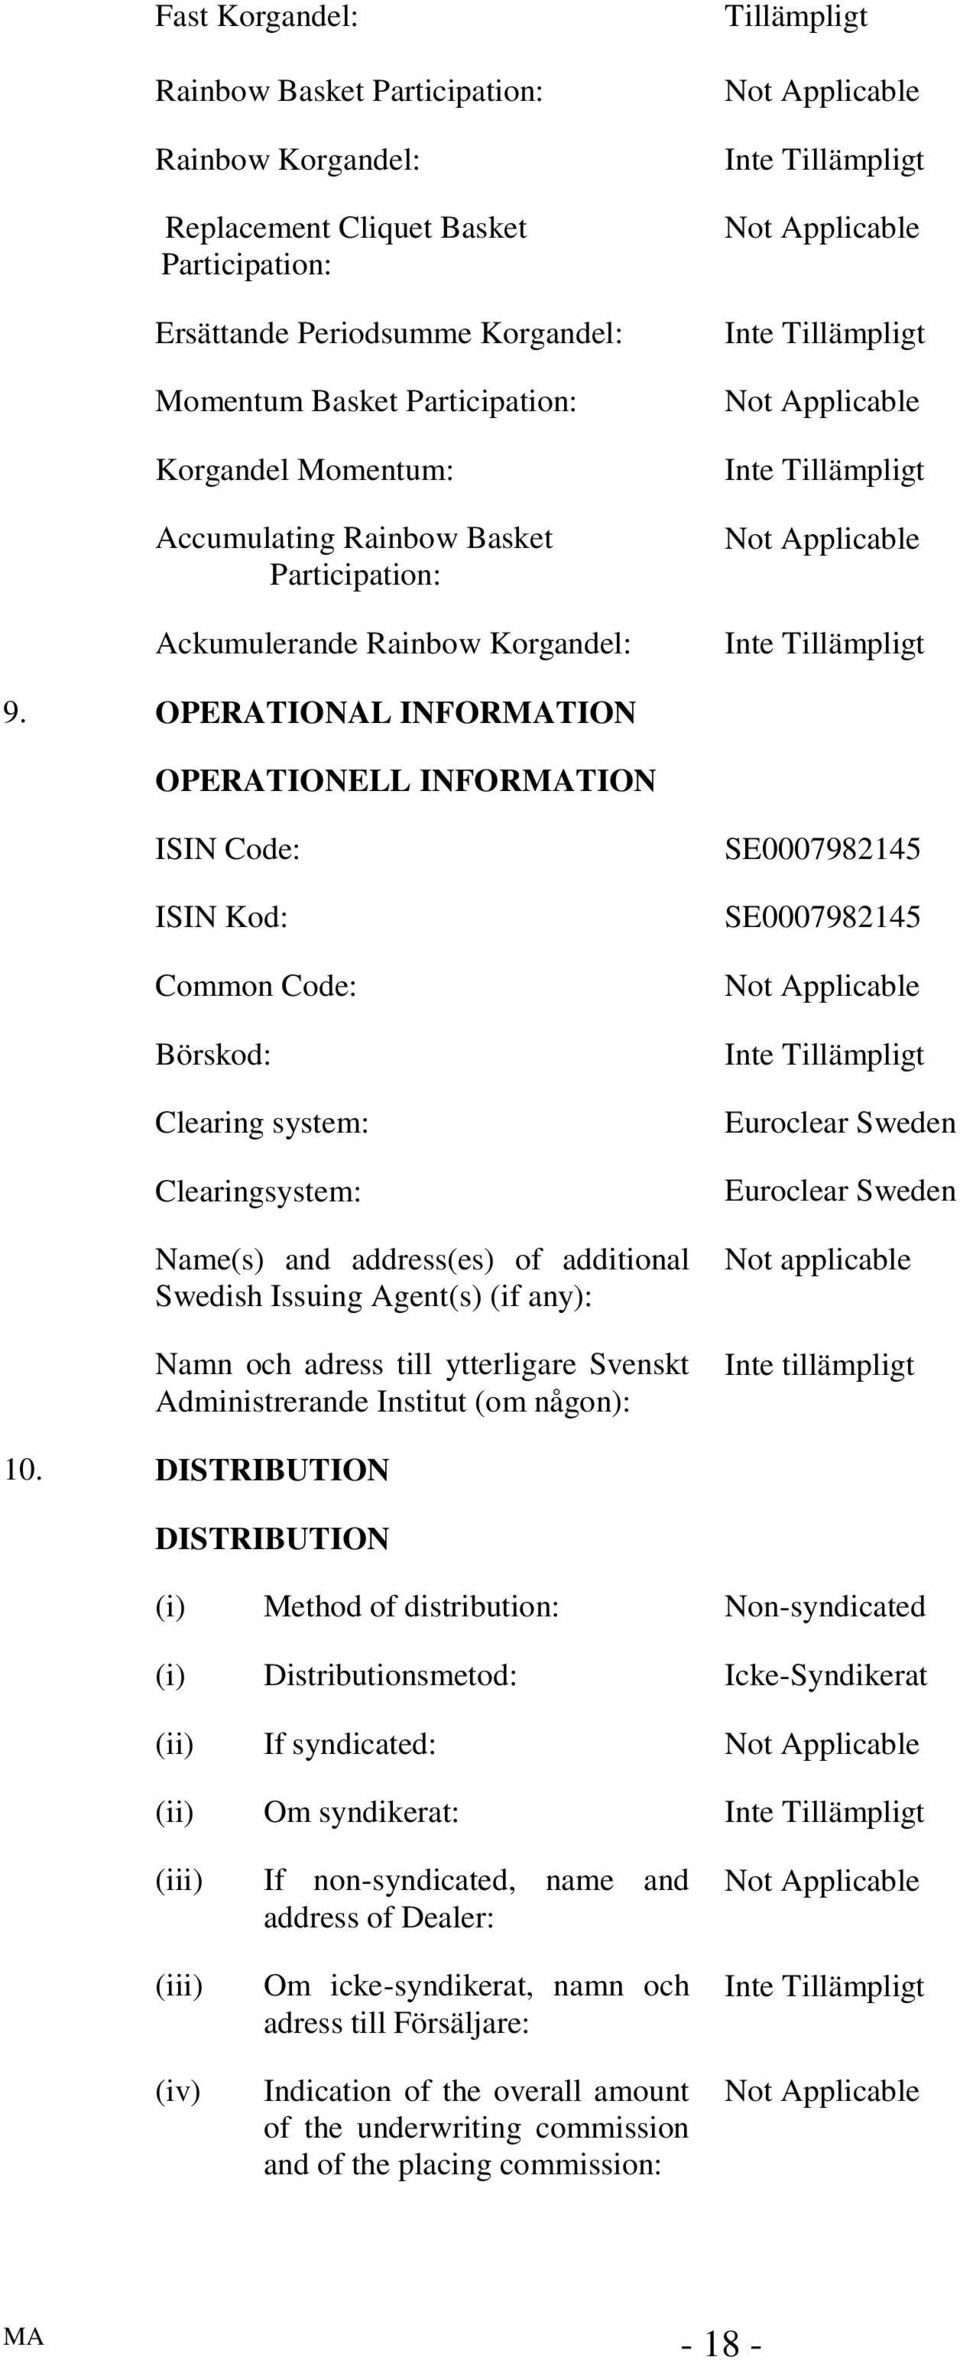 OPERATIONAL INFORTION OPERATIONELL INFORTION ISIN Code: ISIN Kod: Common Code: Börskod: Clearing system: Clearingsystem: Name(s) and address(es) of additional Swedish Issuing Agent(s) (if any): Namn